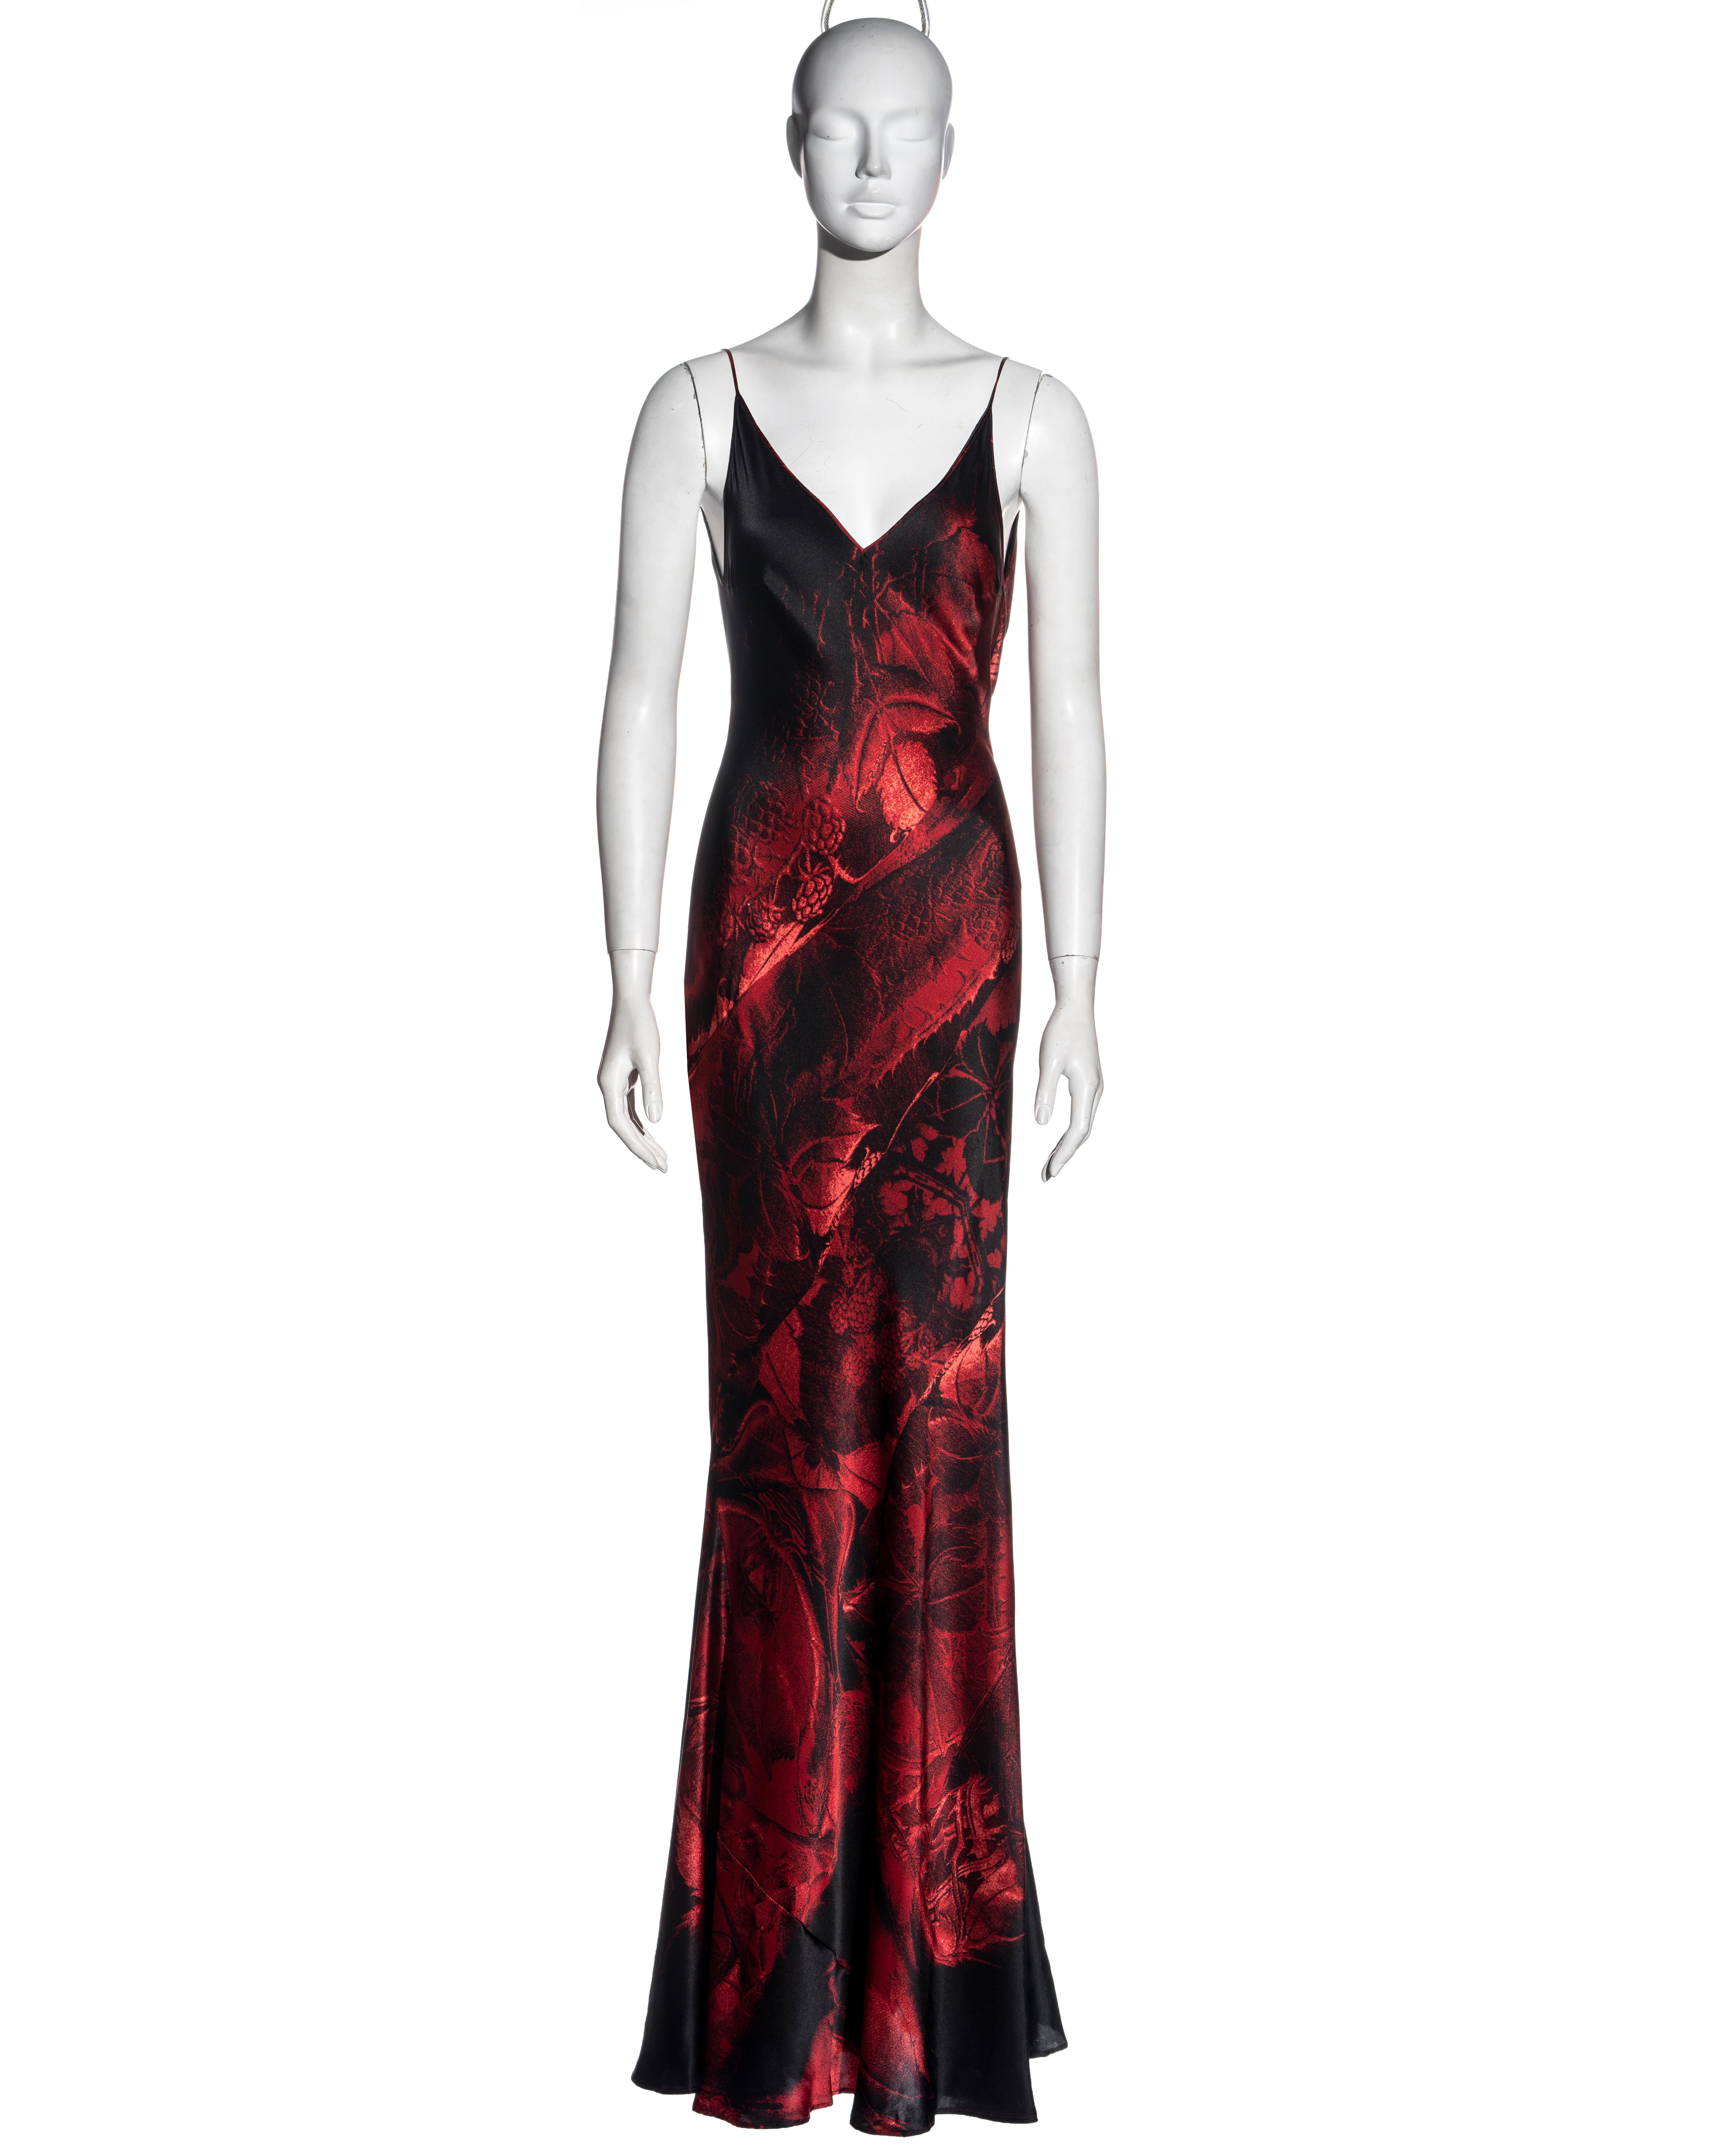 ▪ Roberto Cavalli red silk floor-length evening dress
▪ Red and black abstract photographic print 
▪ Bias-cut
▪ Low back with draped cowl 
▪ Floor-length skirt with train 
▪ Spaghetti straps 
▪ Size Large
▪ Fall-Winter 2000
▪ 100% Silk
▪ Made in